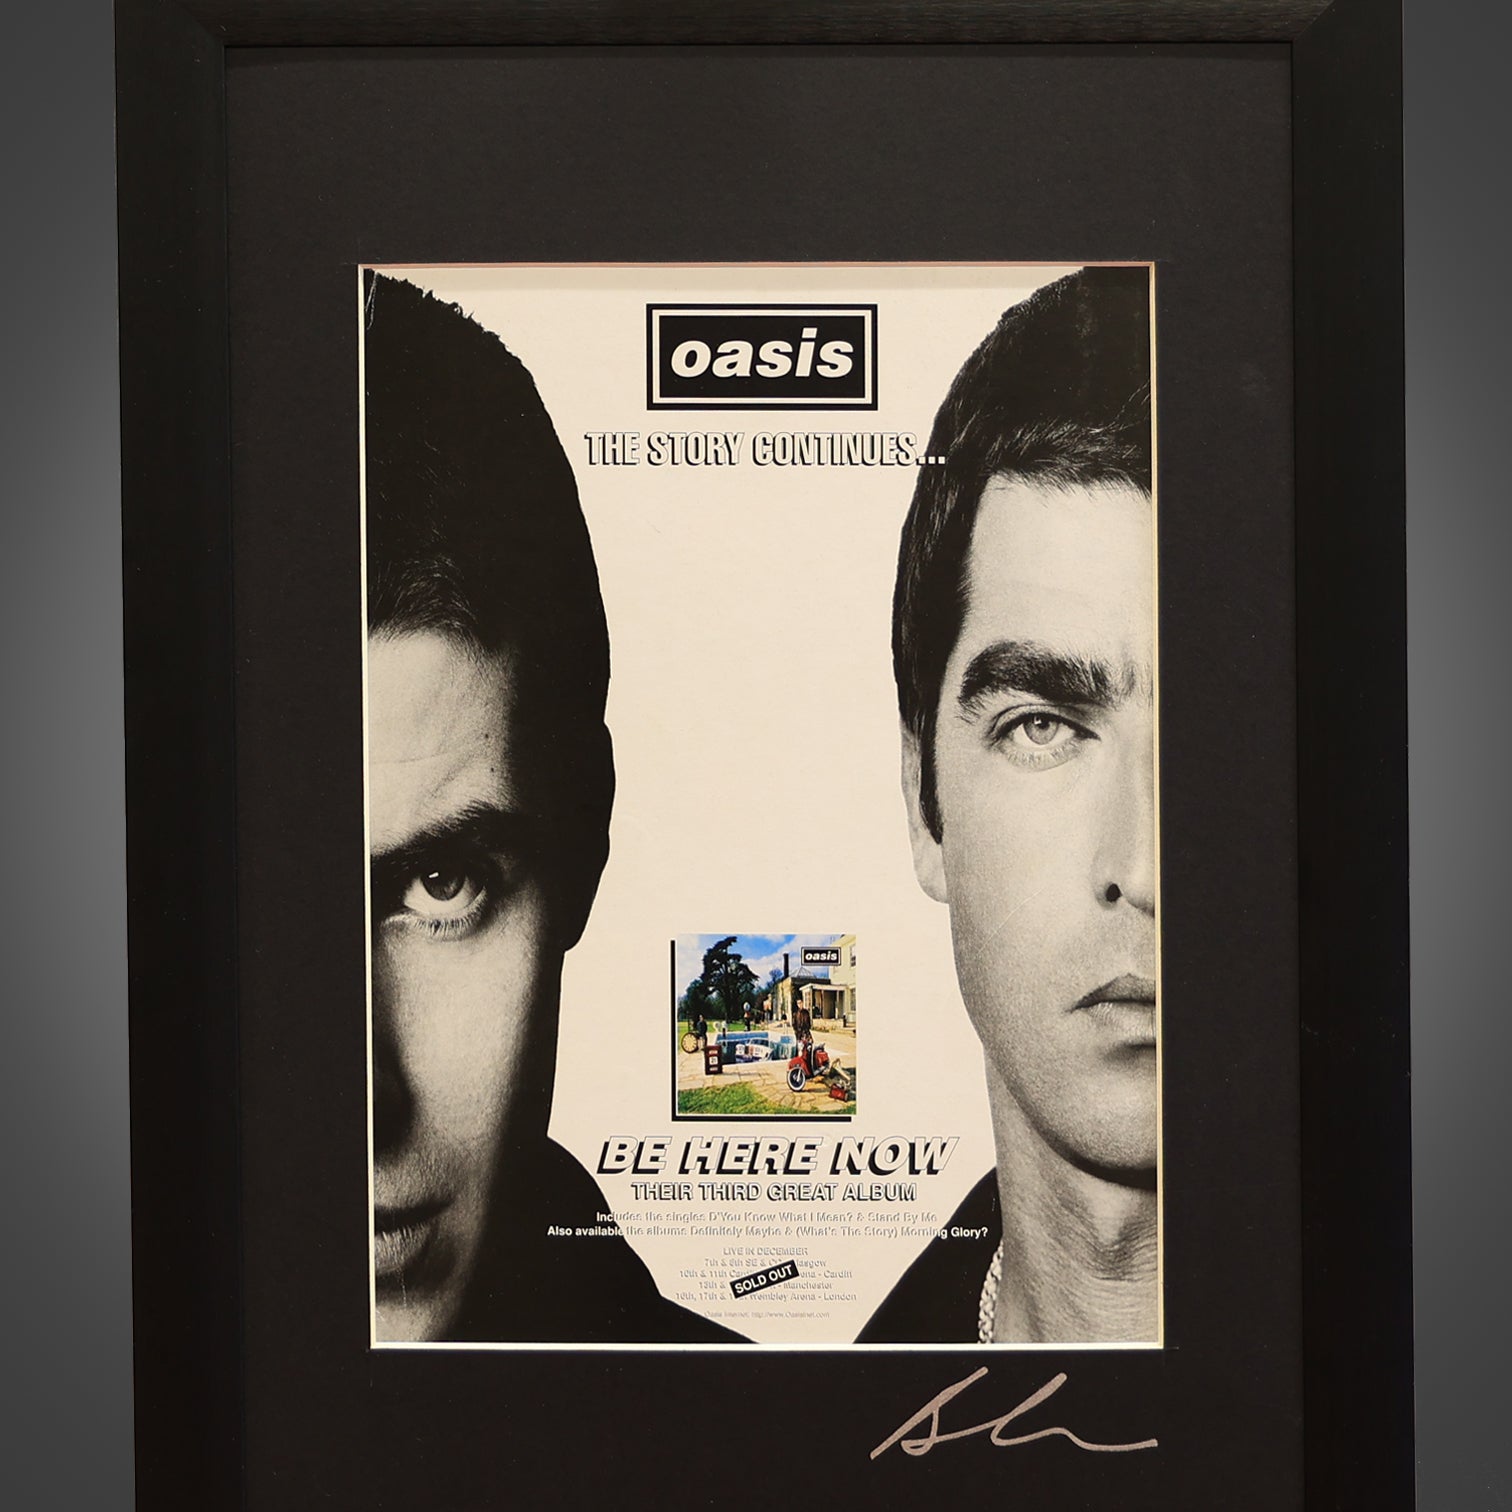 Oasis - Be Here Now - The Story Continues Press Ad - New Item